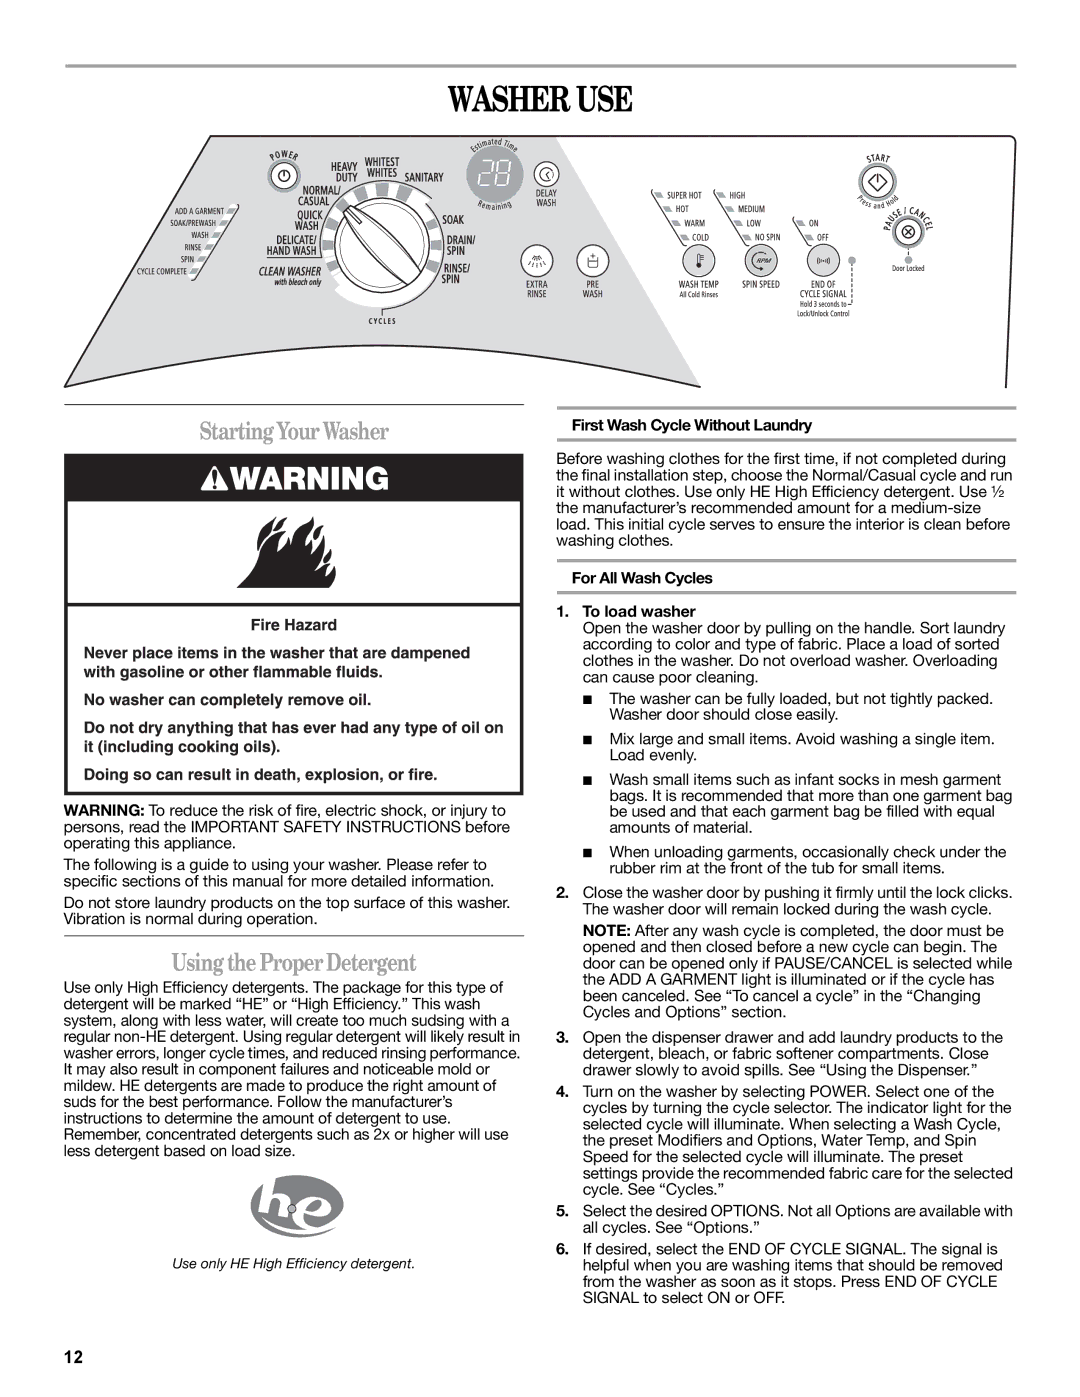 Whirlpool W10235934A manual Washer USE, Starting Your Washer, Using the Proper Detergent, First Wash Cycle Without Laundry 